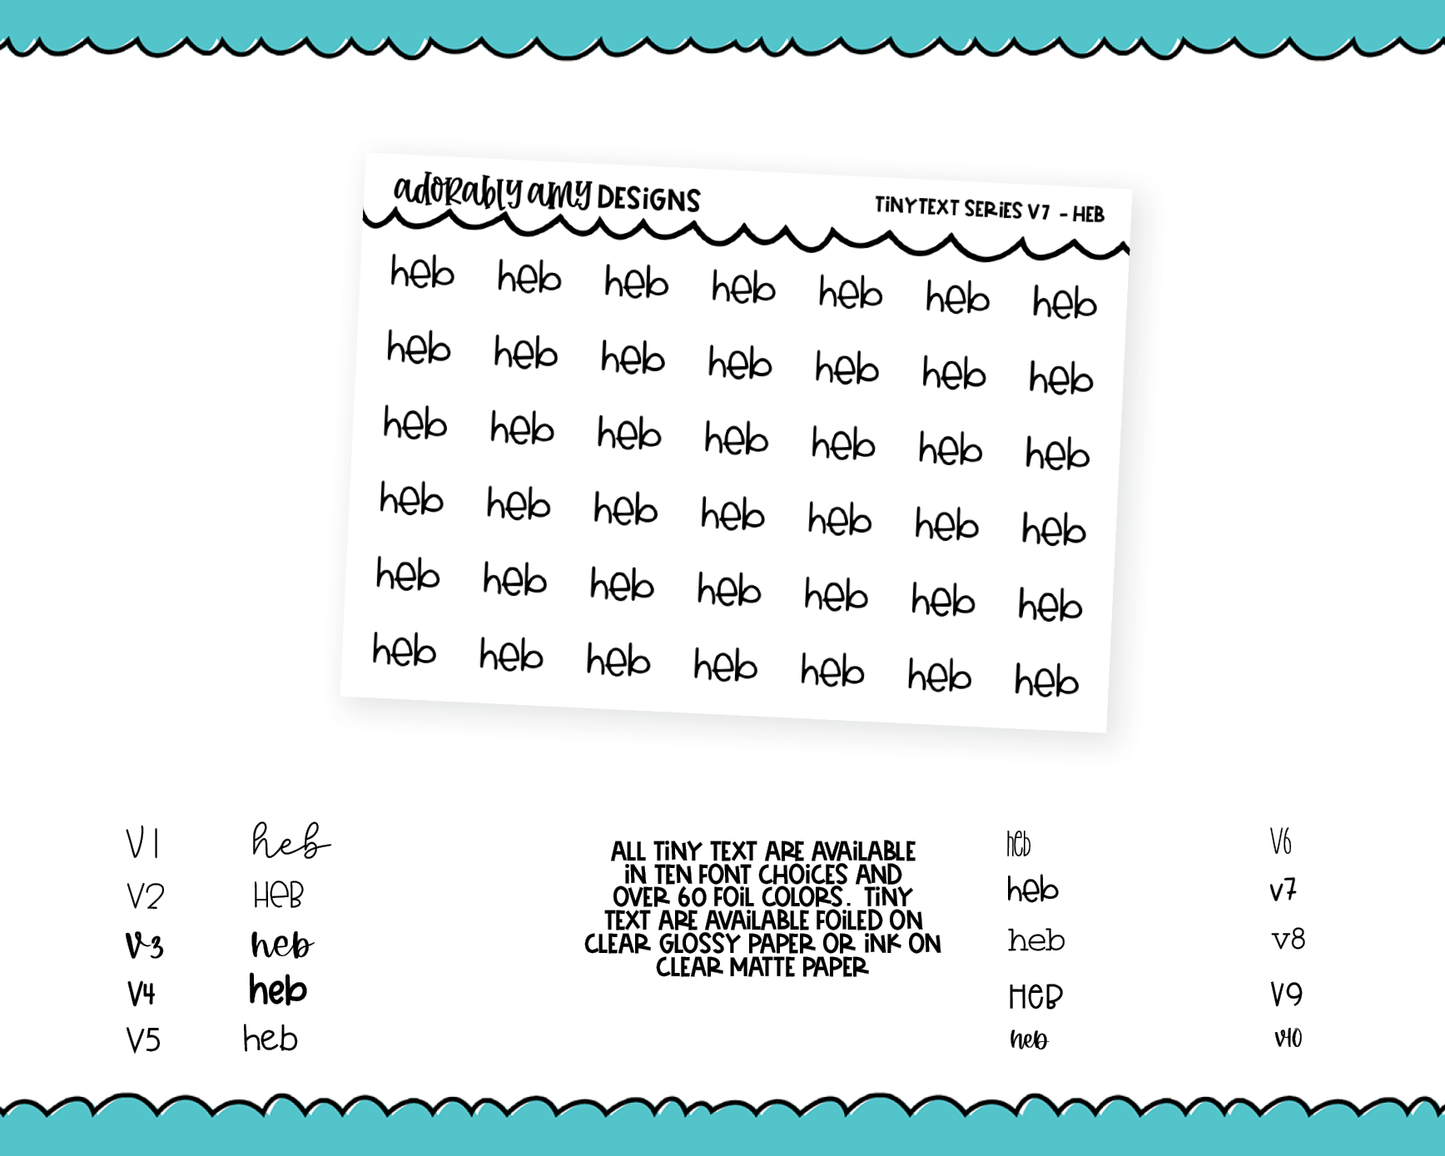 Foiled Tiny Text Series - HEB Checklist Size Planner Stickers for any Planner or Insert